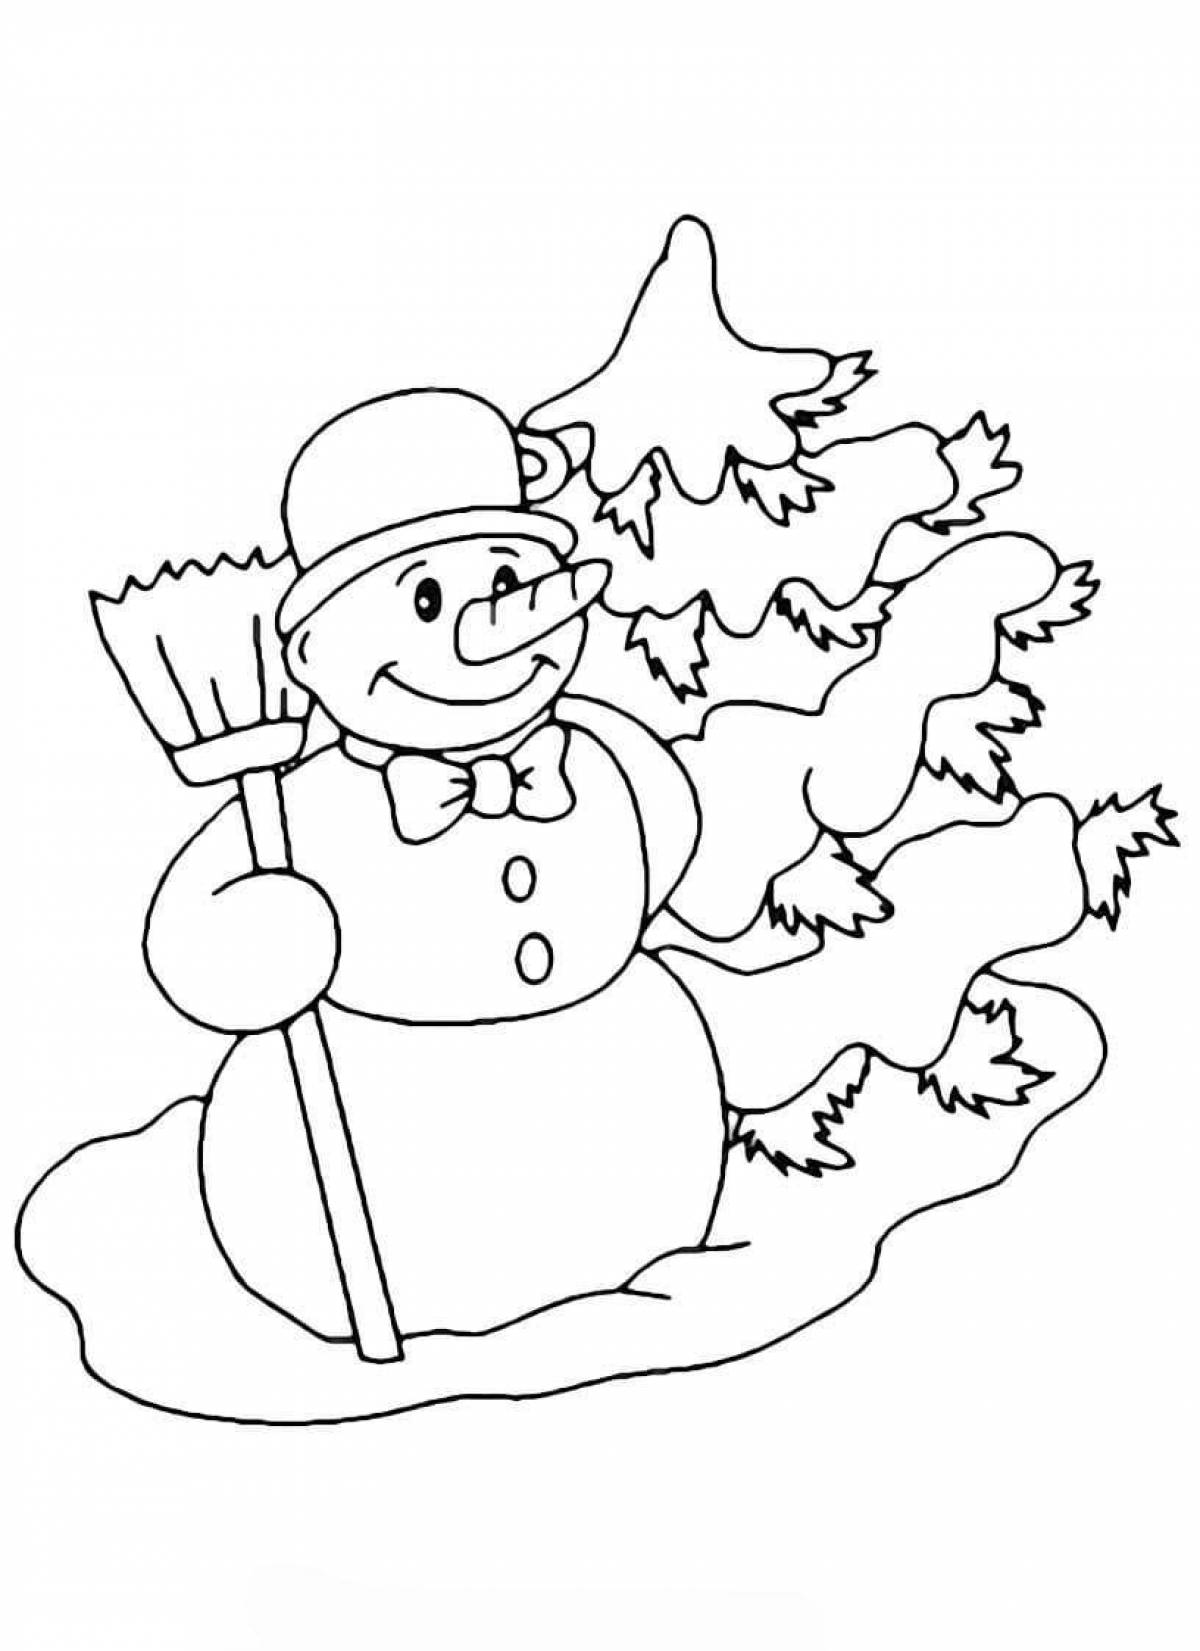 Animated snowman coloring book